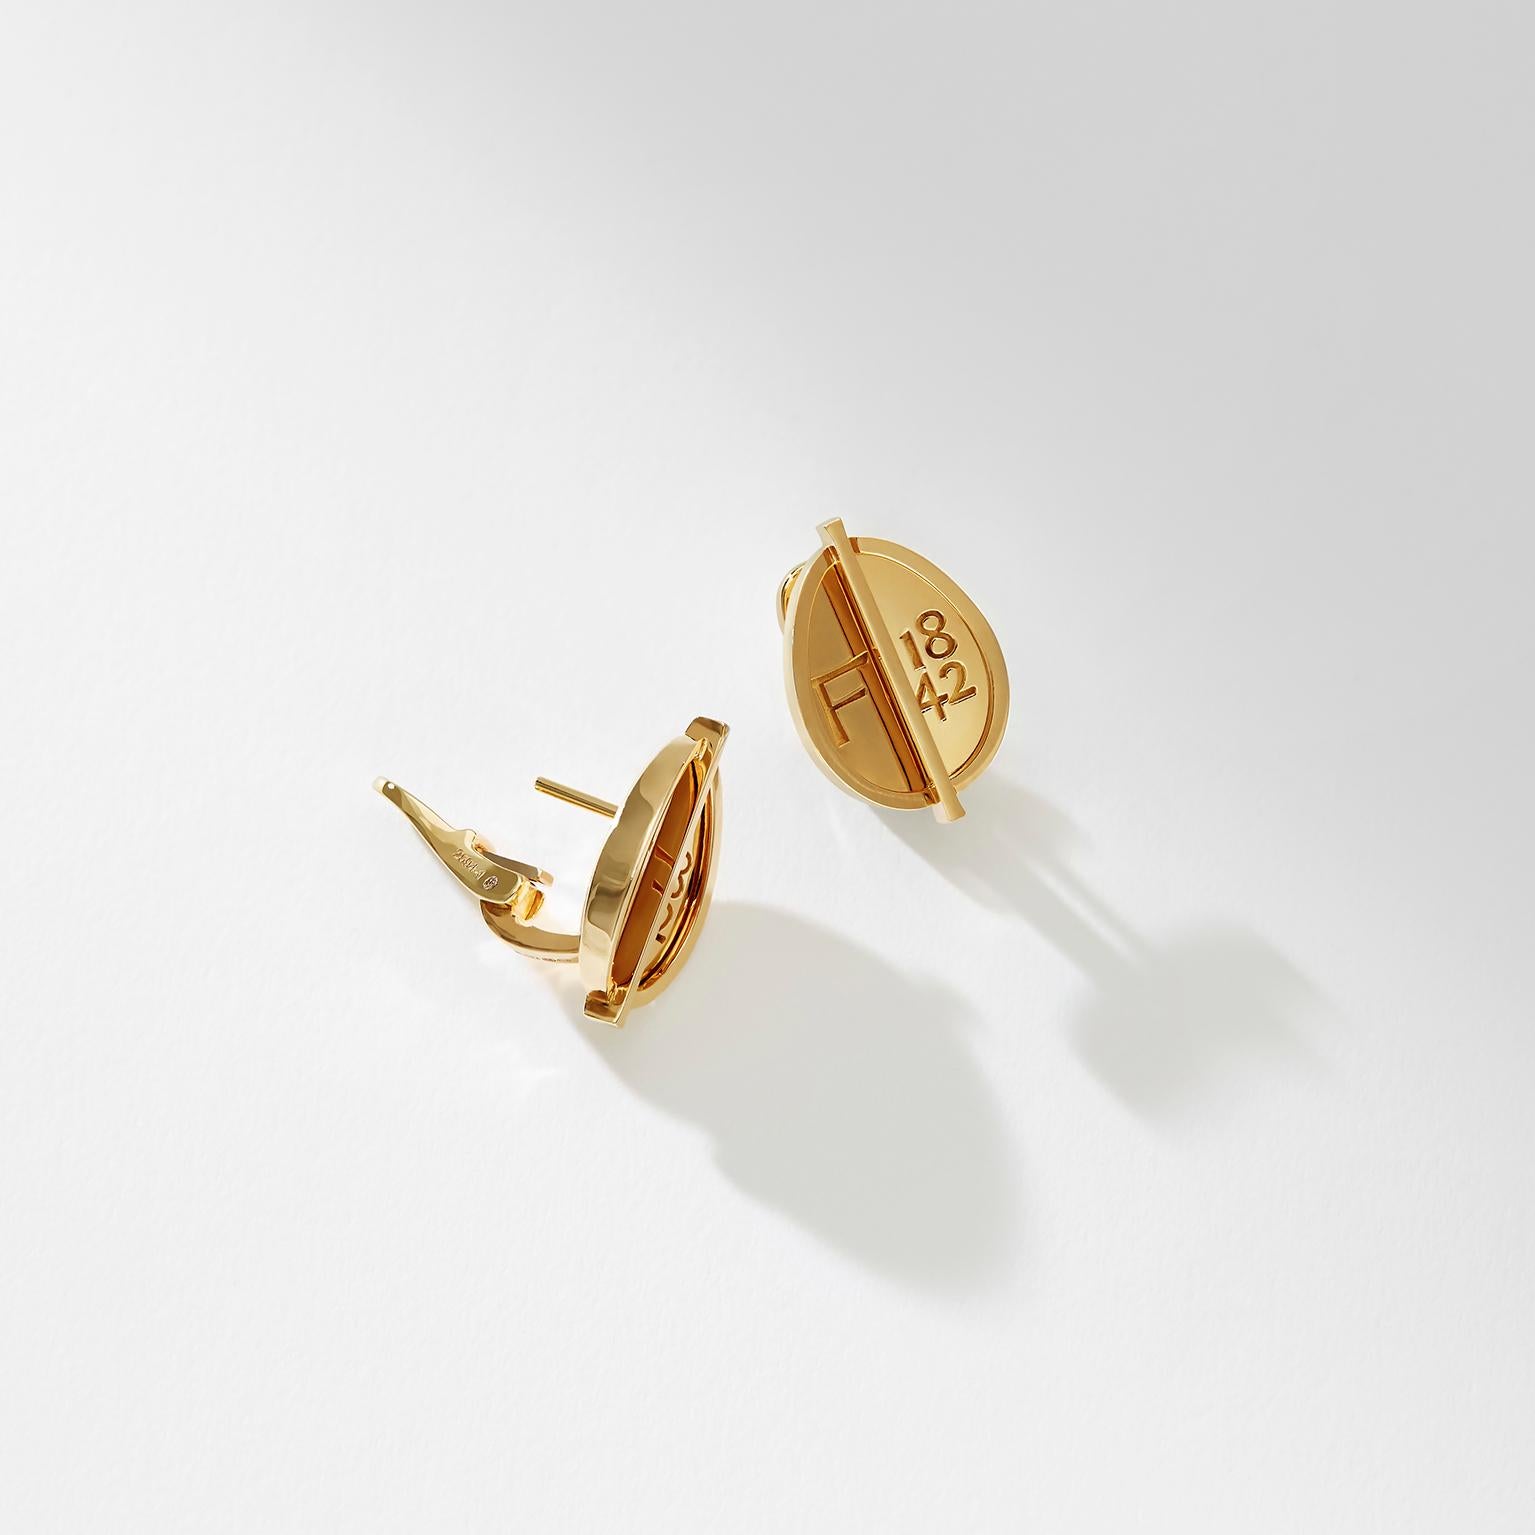 These Fabergé 1842 Yellow Gold Grande Egg Stud Earrings feature the Fabergé hallmark set in polished 18 karat yellow gold. The eggs measure 12mm in height and 3mm in depth. These earrings stack perfectly with the smaller Fabergé 1842 Yellow Gold Egg